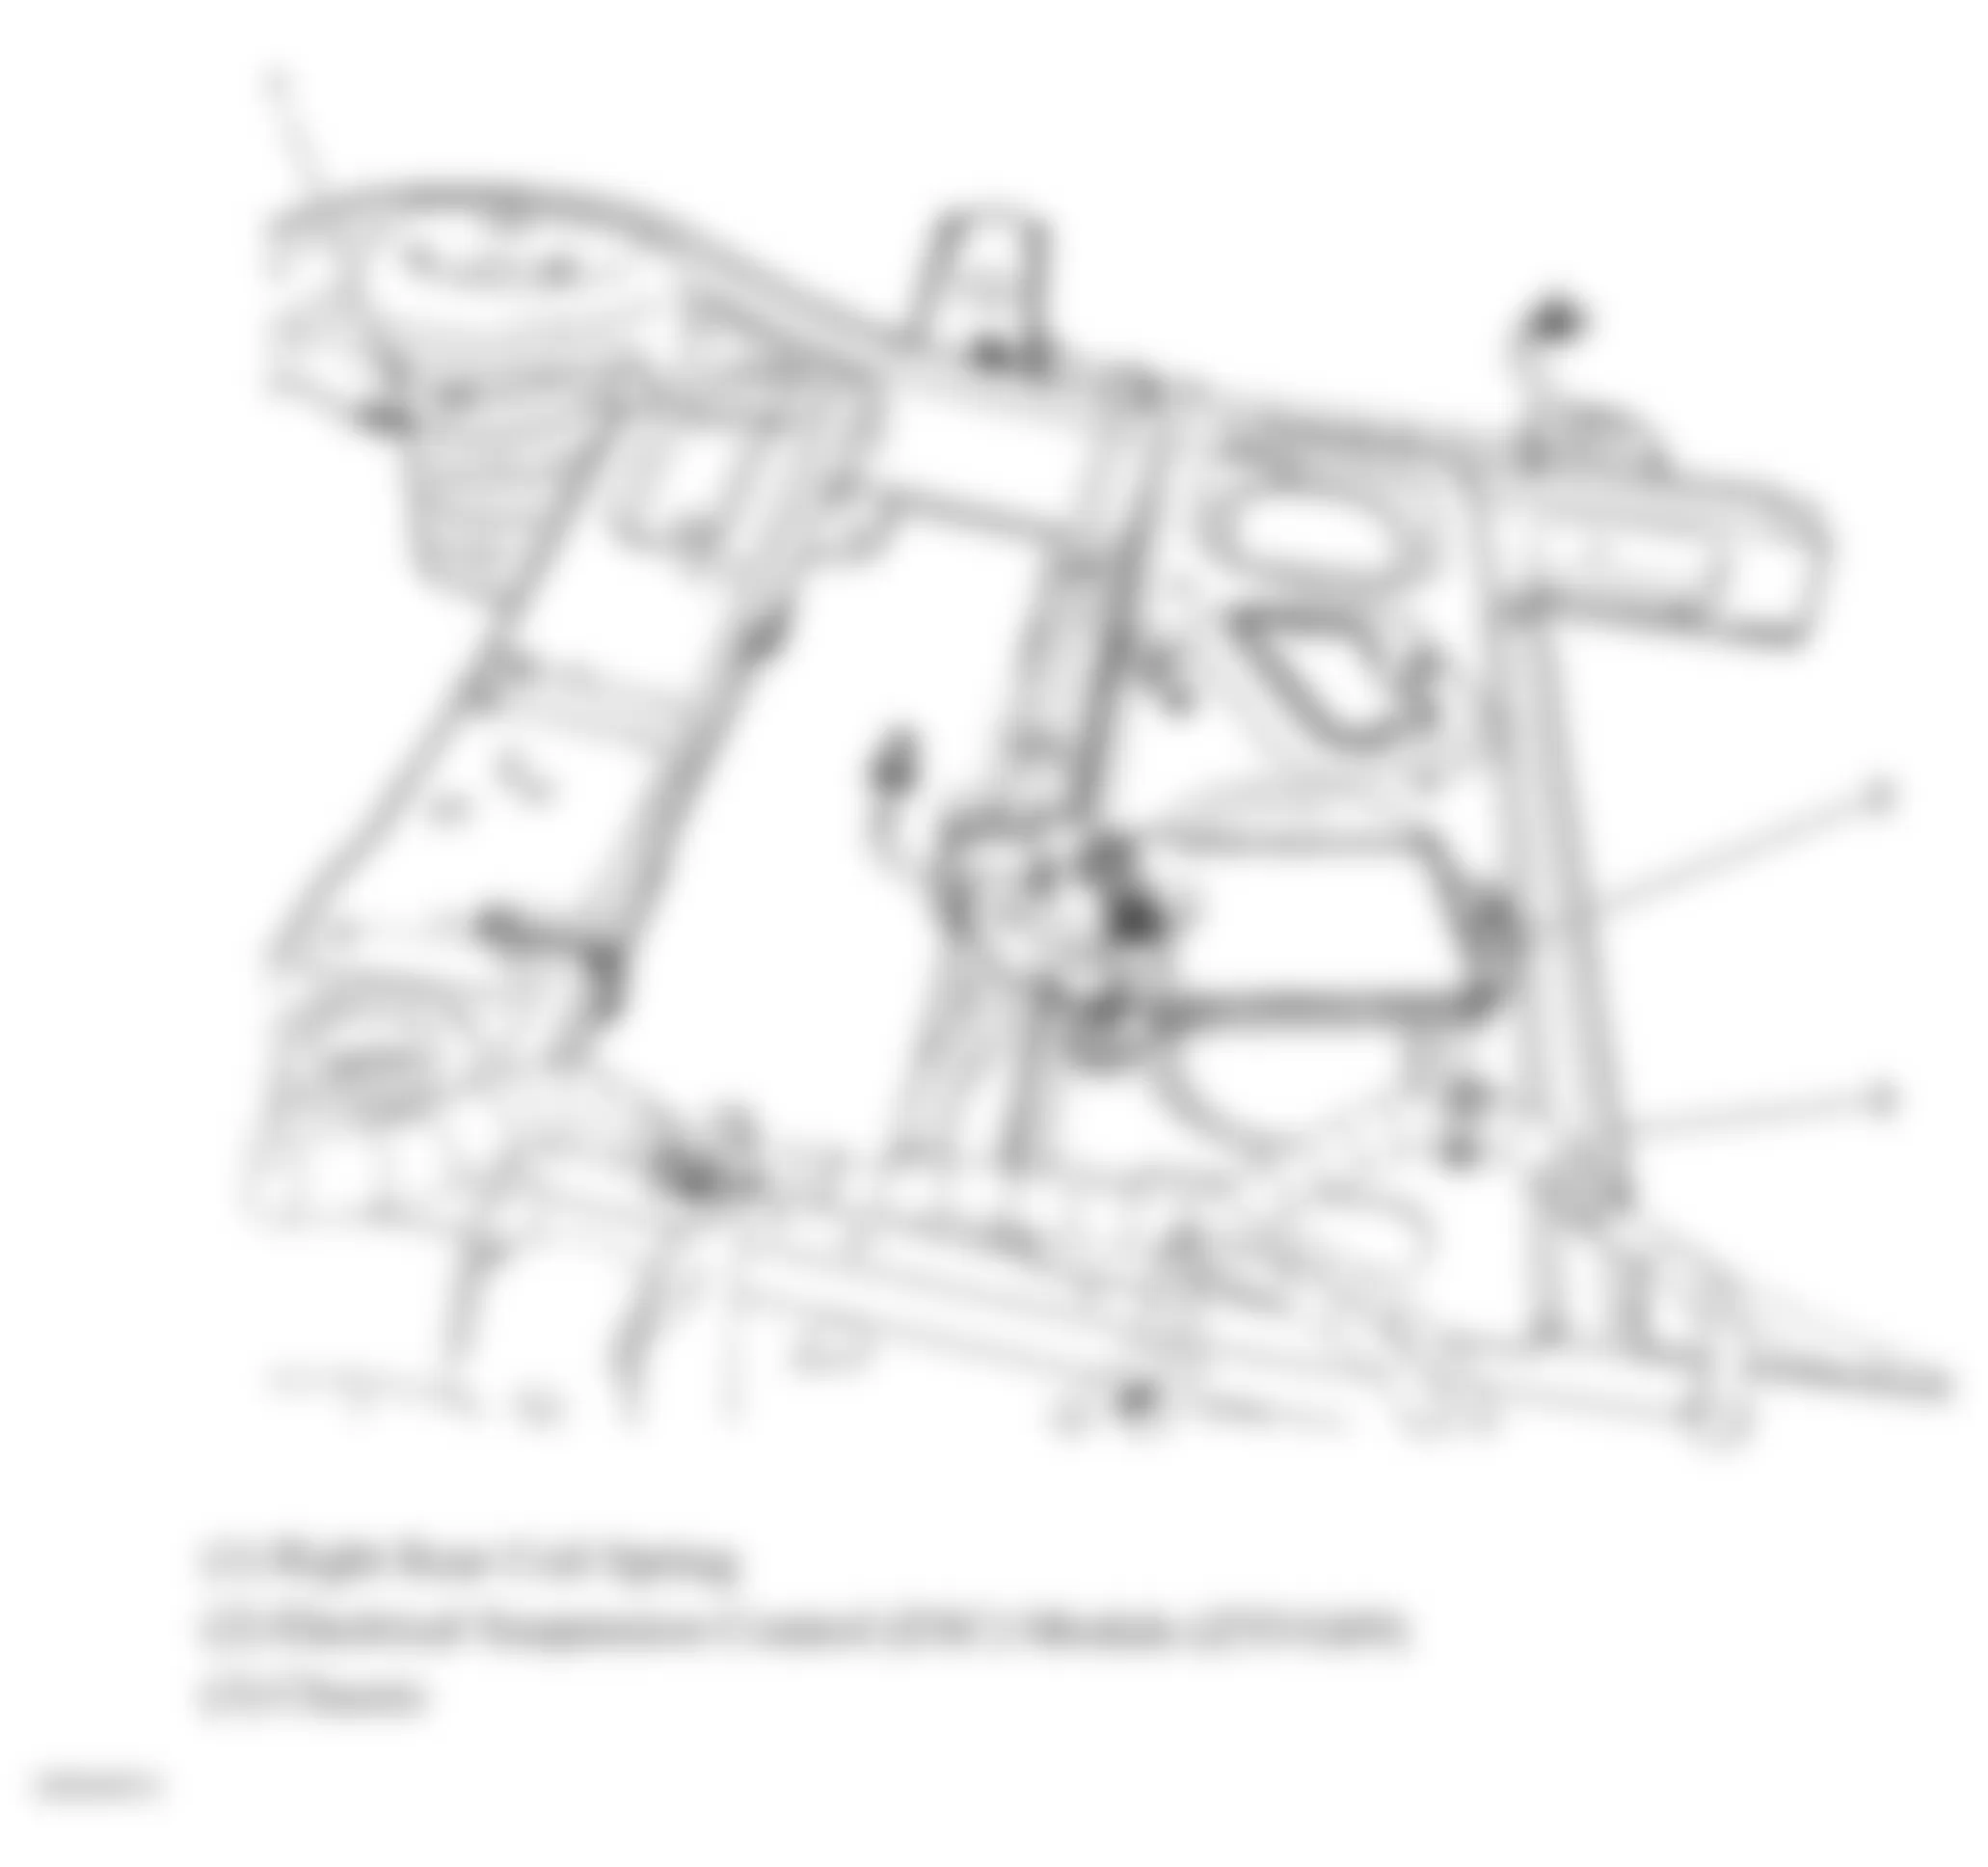 GMC Yukon XL C1500 2007 - Component Locations -  Rear Chassis